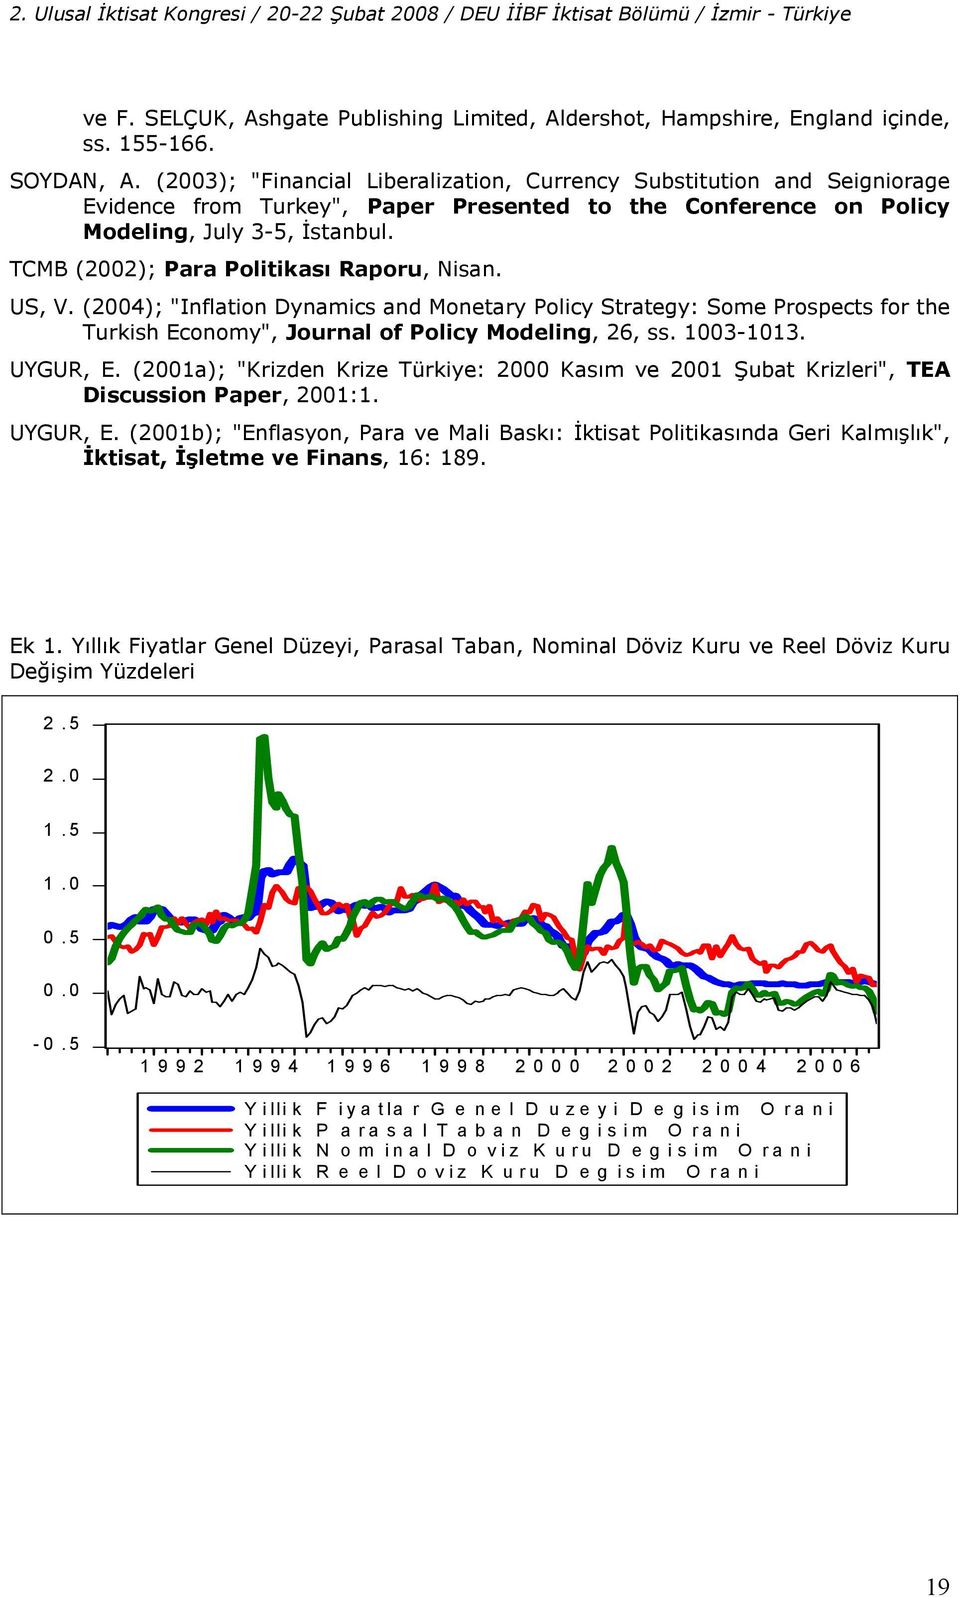 TCMB (2002); Para Politikas( Raporu, Nisan. US, V. (2004); "Inflation Dynamics and Monetary Policy Strategy: Some Prospects for the Turkish Economy", Journal of Policy Modeling, 26, ss. 1003-1013.